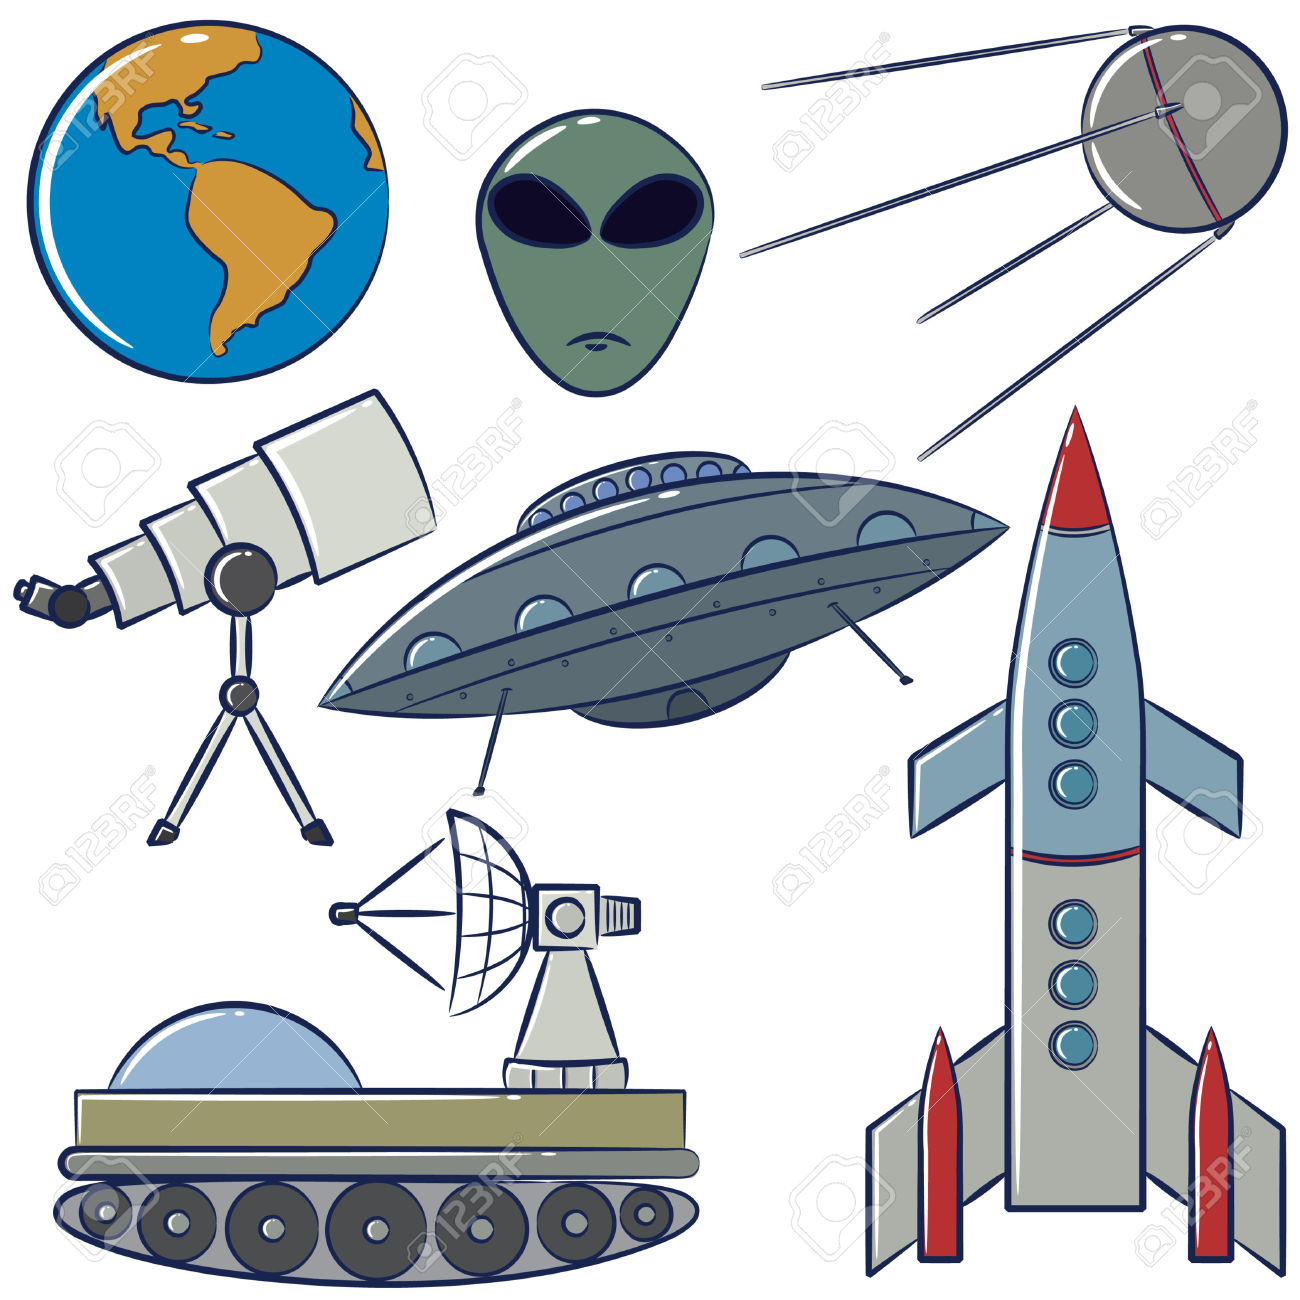 space camp clipart - photo #15